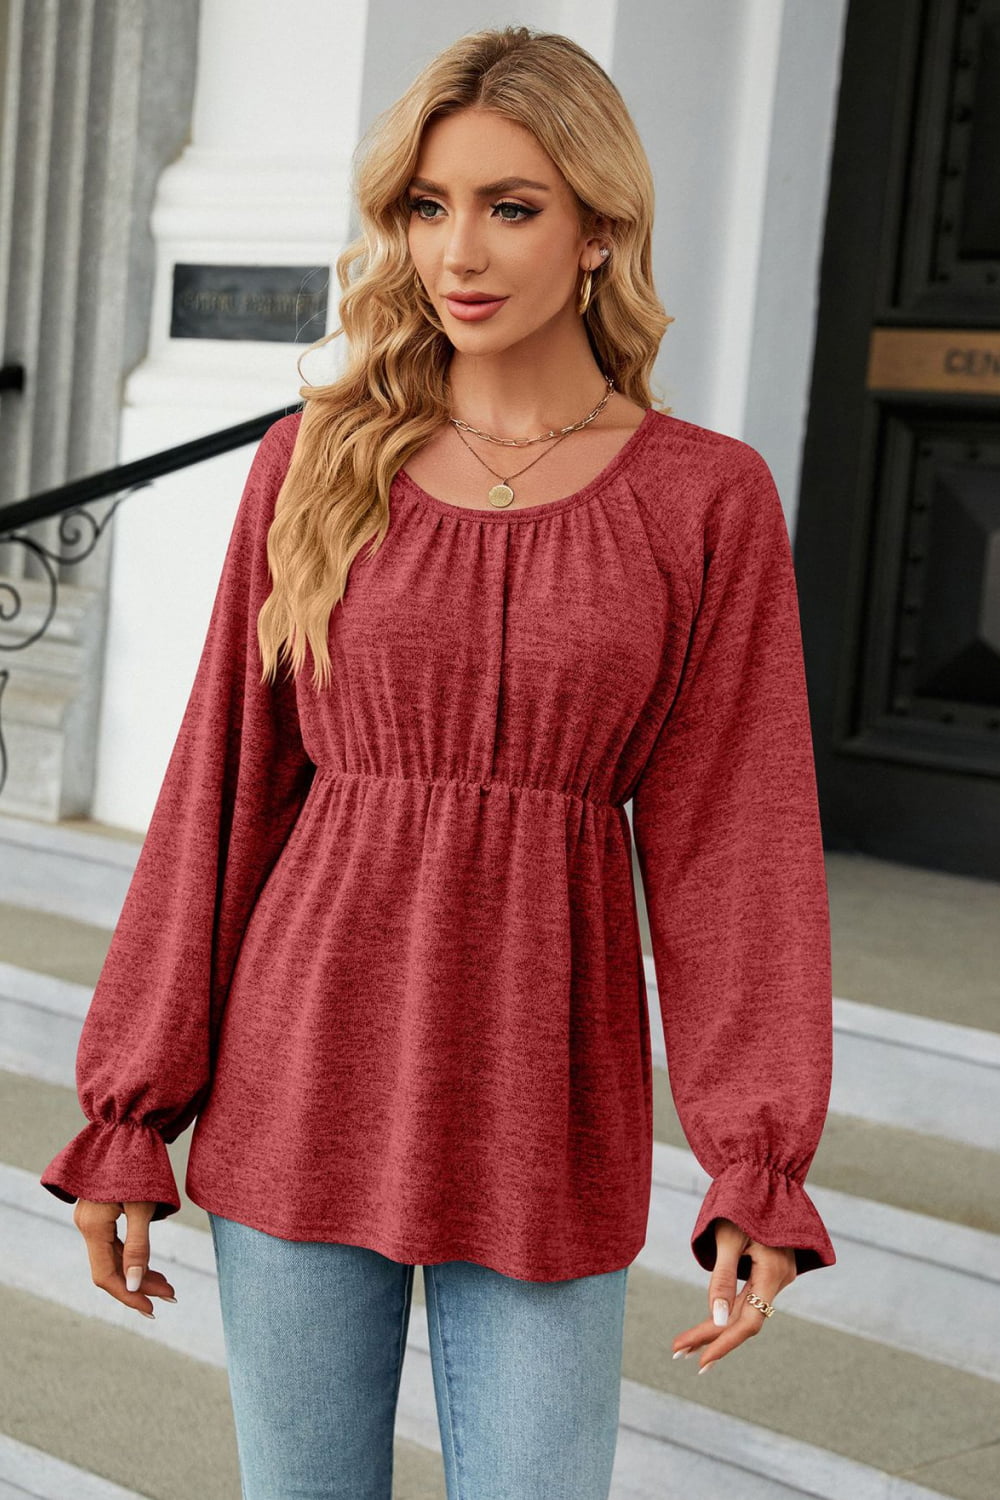 Round Neck Flounce Sleeve Blouse - Women’s Clothing & Accessories - Shirts & Tops - 11 - 2024